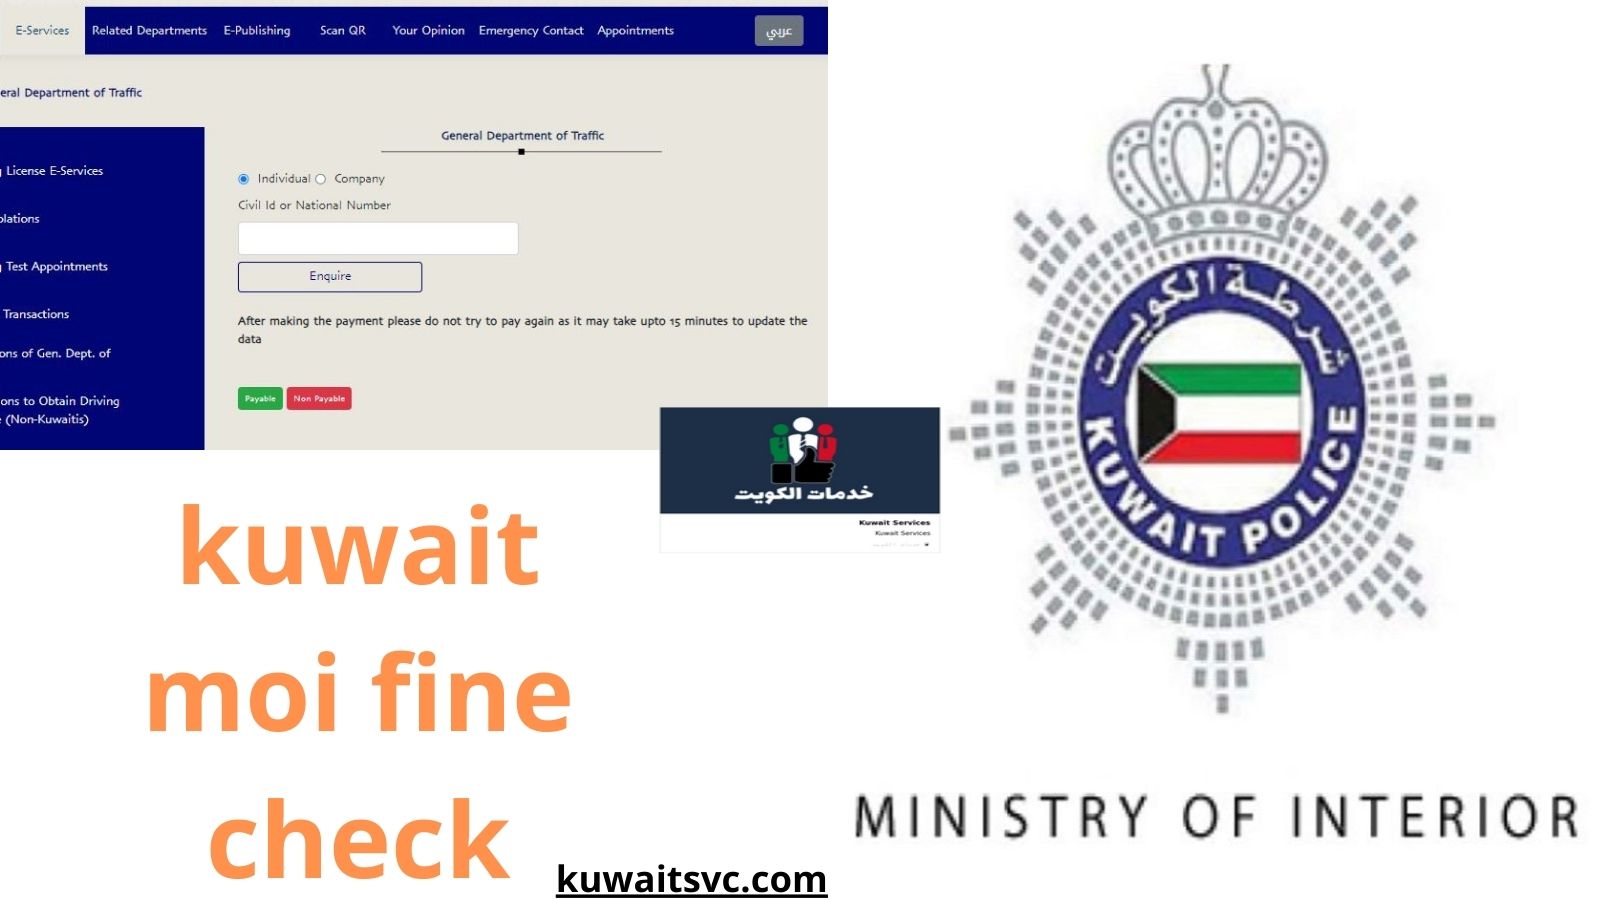 kuwait moi fine check: Verify with Civil ID or Company Number, Process Fine Payments, & More